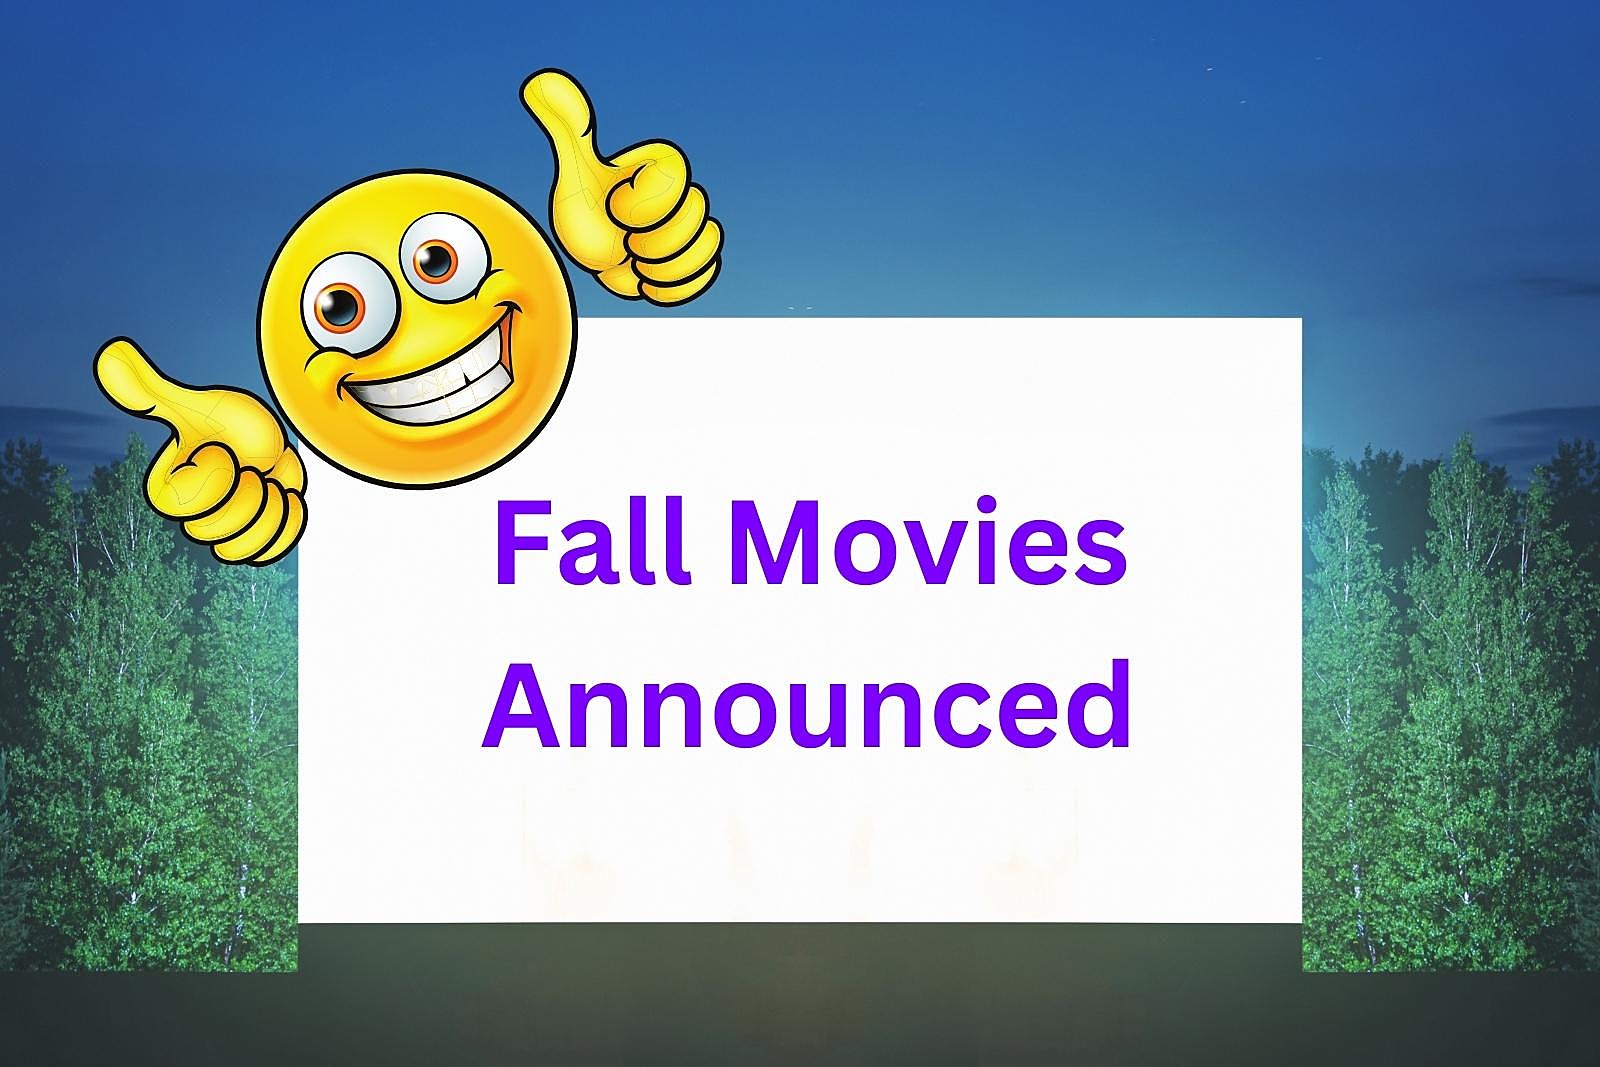 Enjoy Free Movies in The Park at Spring Lake Park This Fall photo